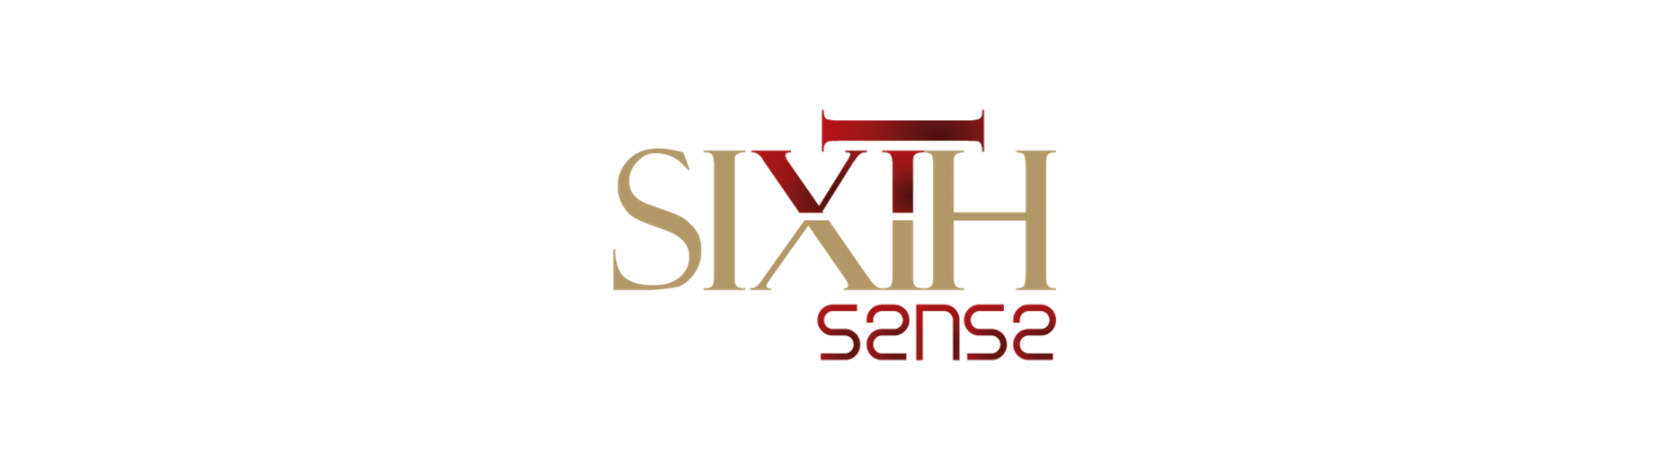 Sixth Sense is one of the investors in Design Cafe, India's Best Home Interiors Company.